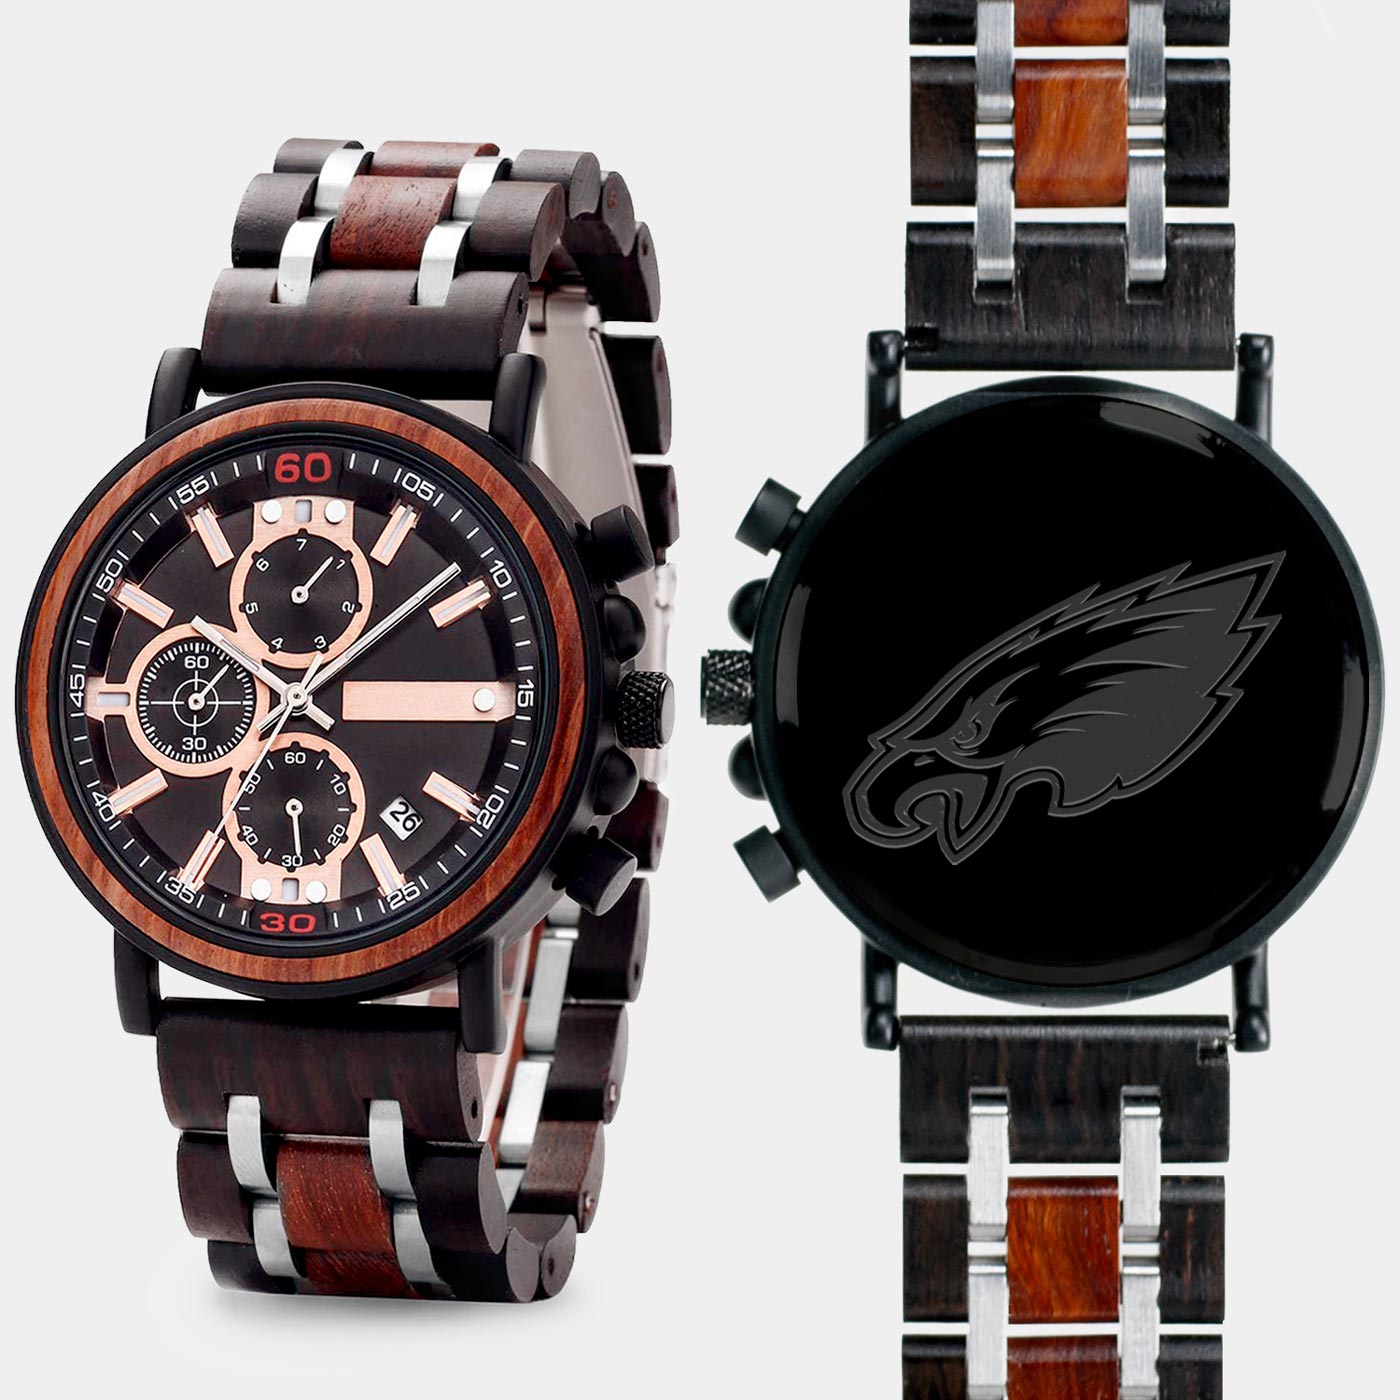 Philadelphia Eagles Mens Wrist Watch  - Personalized Philadelphia Eagles Mens Watches - Custom Gifts For Him, Birthday Gifts, Gift For Dad - Best 2022 Philadelphia Eagles Christmas Gifts - Black 45mm NFL Wood Watch